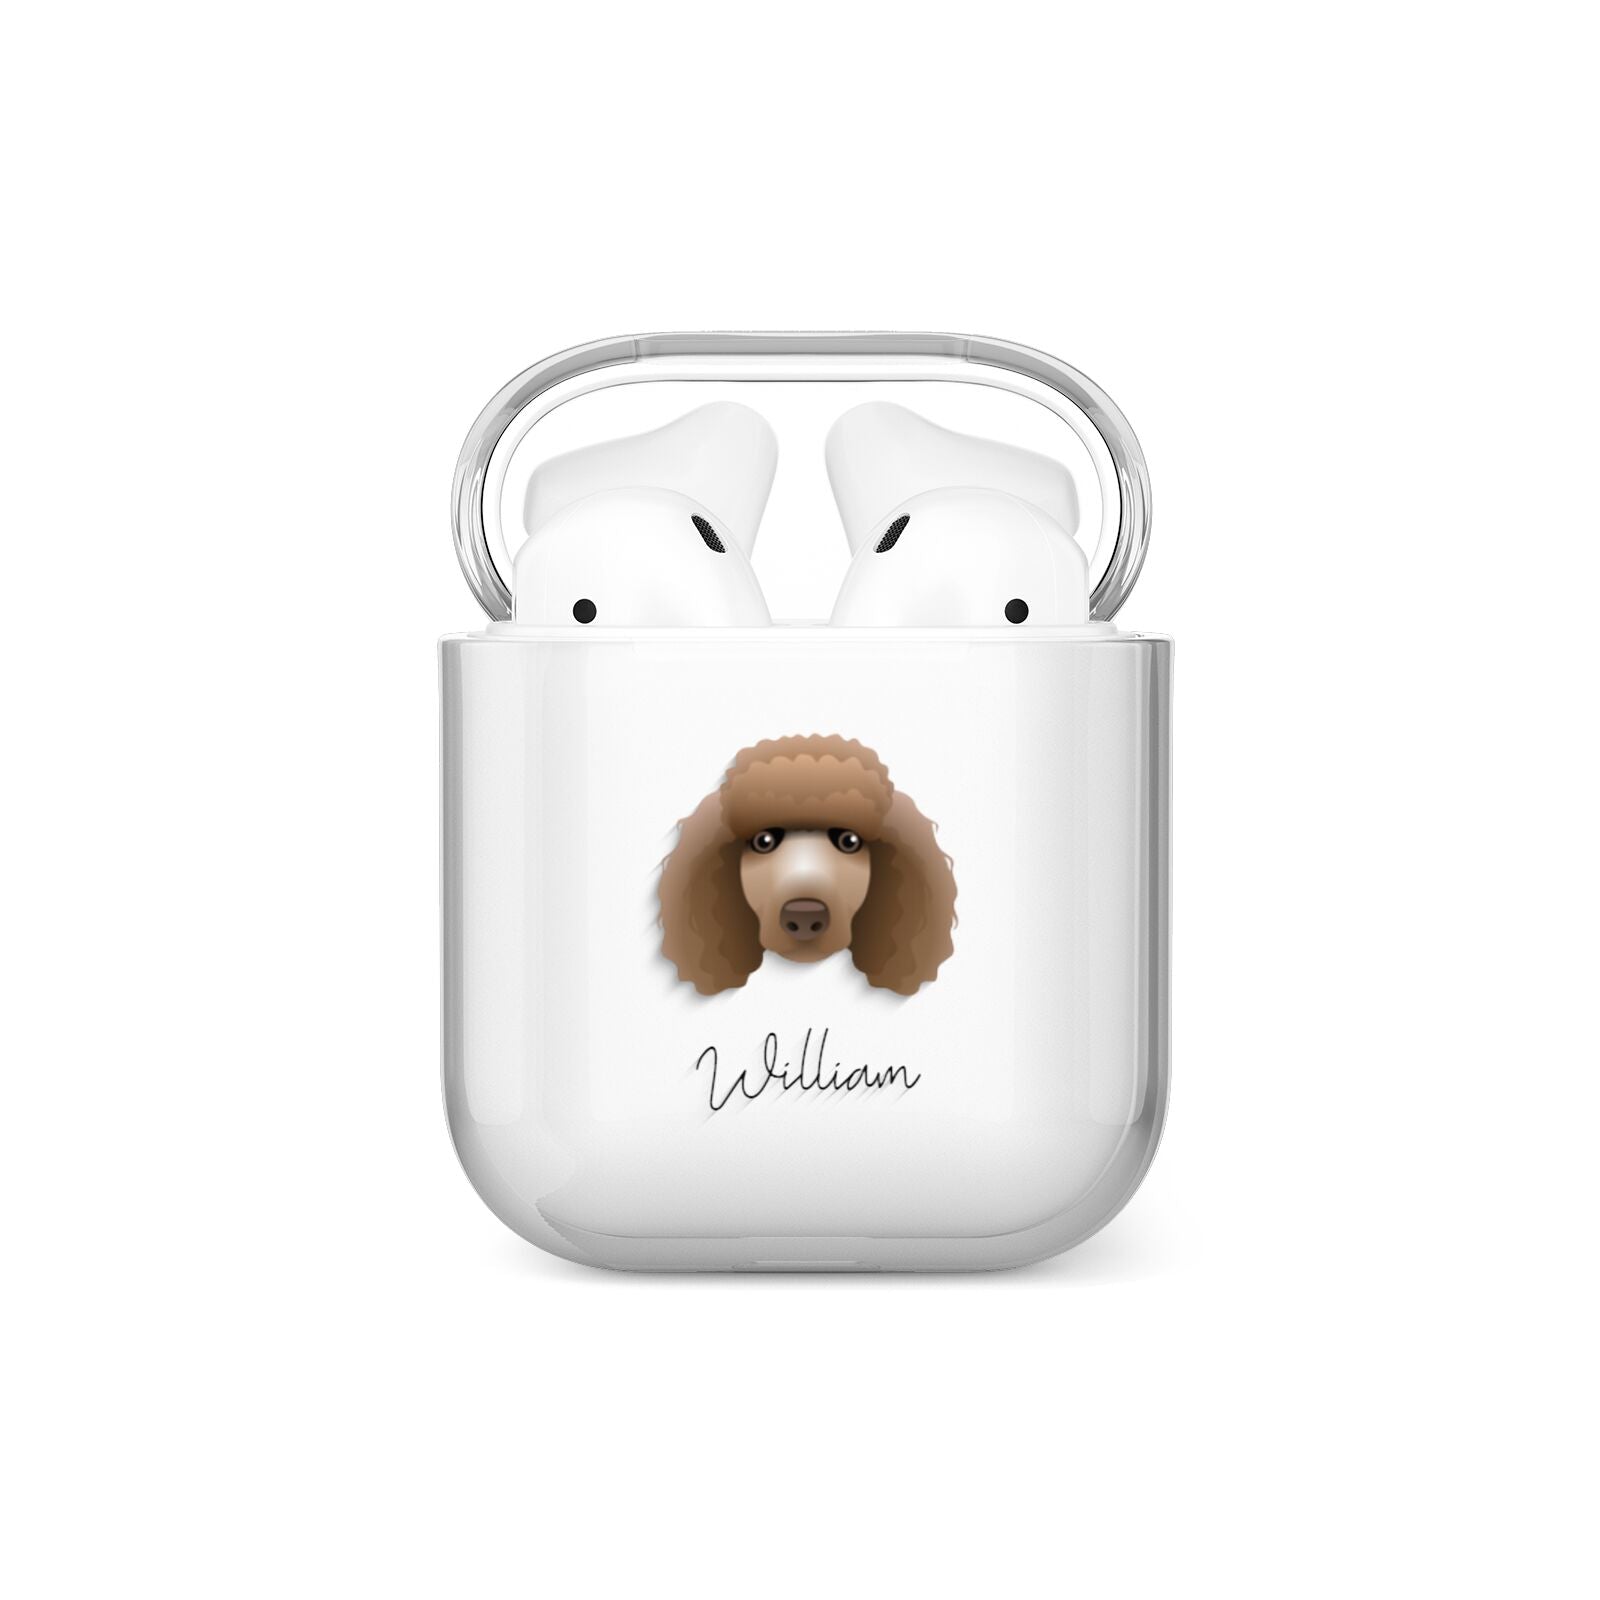 Poodle Personalised AirPods Case